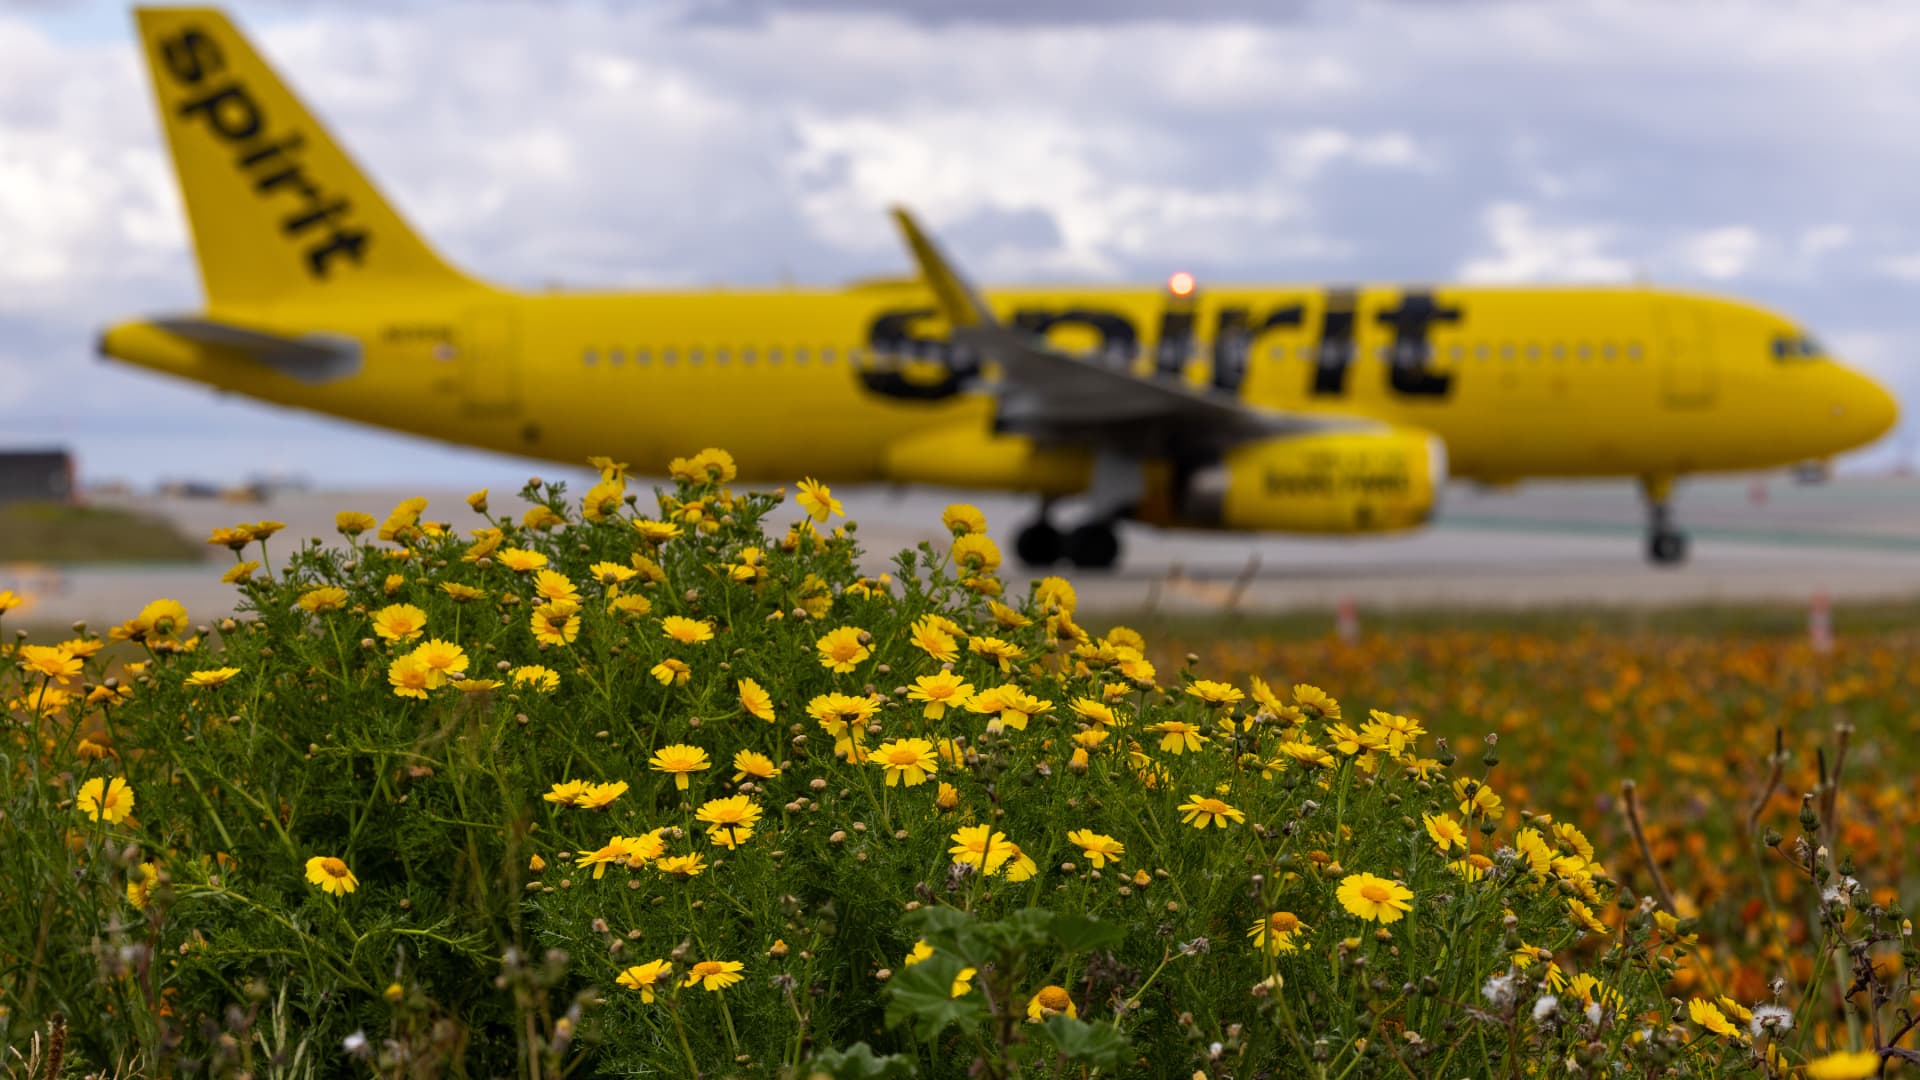 Spirit Airlines ranked as the No. 3 best U.S. airline, according to WalletHub.